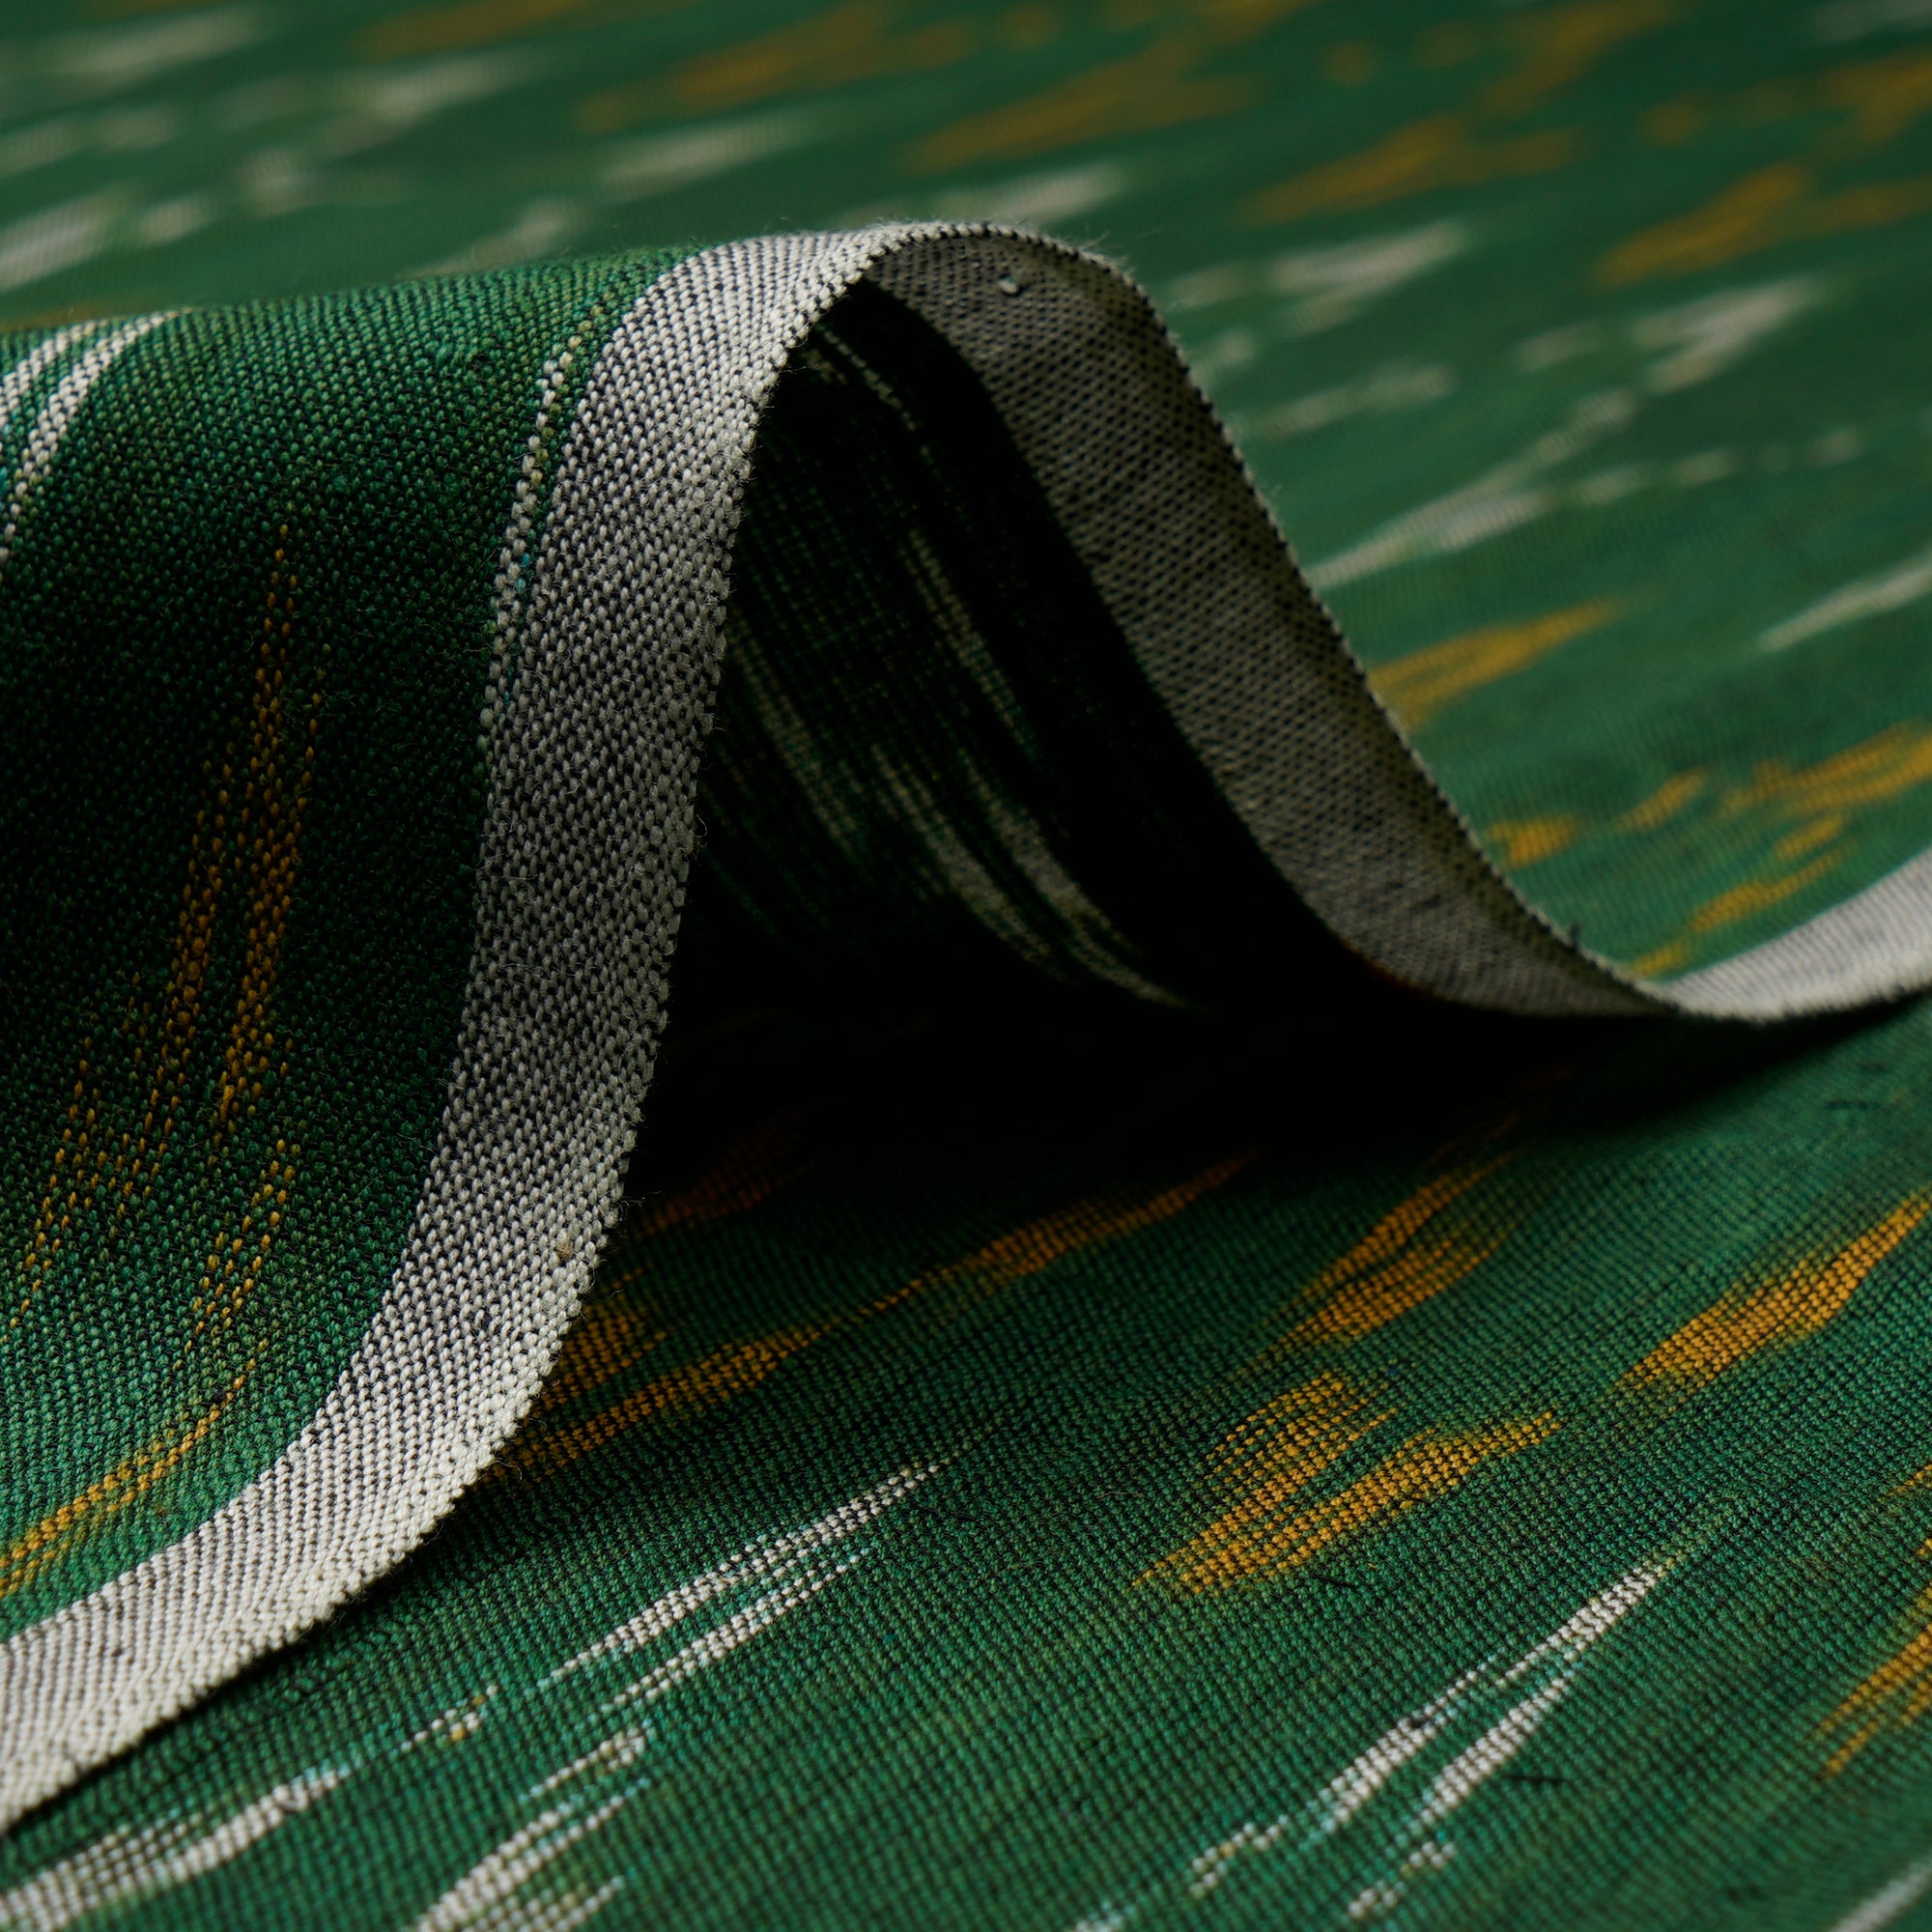 Dark Green Washed Woven Ikat Cotton Fabric